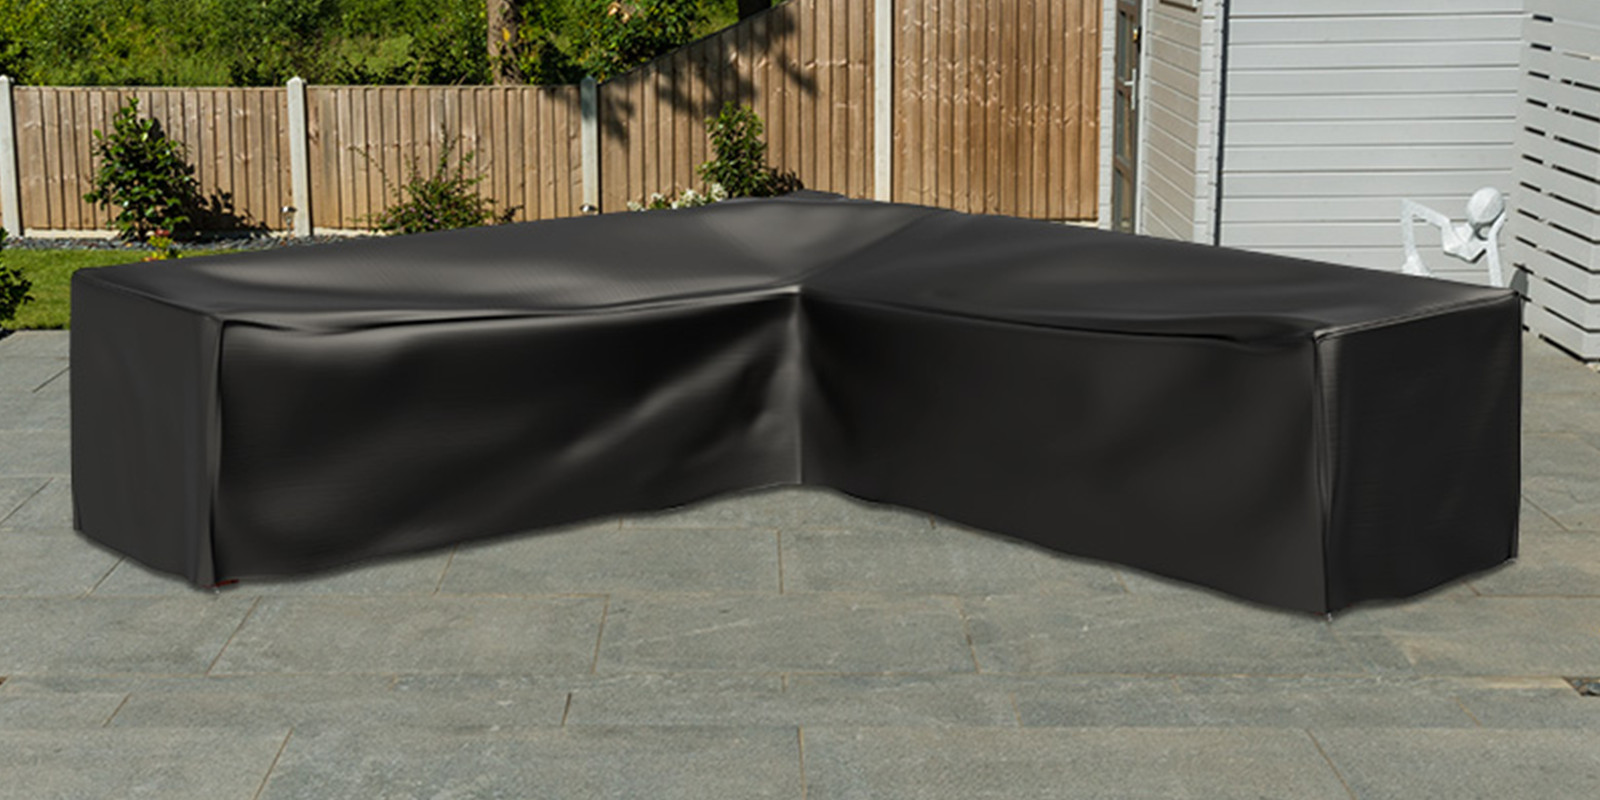 Weatherproof Covers for Rattan Furniture